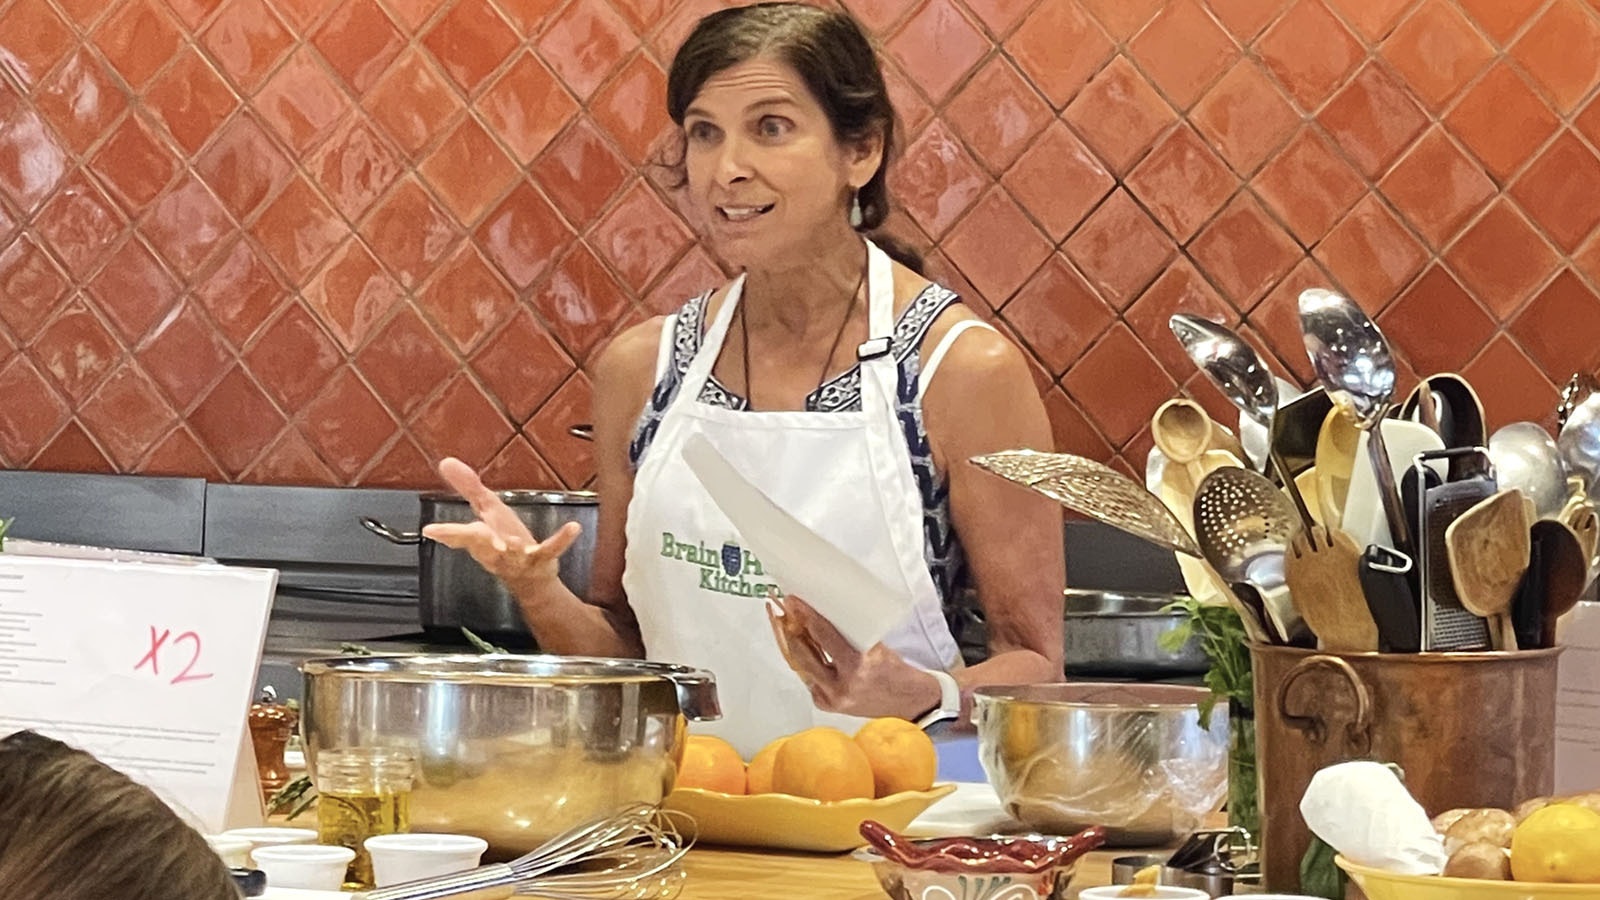 Dr. Annie Fenn takes students to Blue Zone countries to teach her Brain Health Kitchen courses, like this one in Mexico.